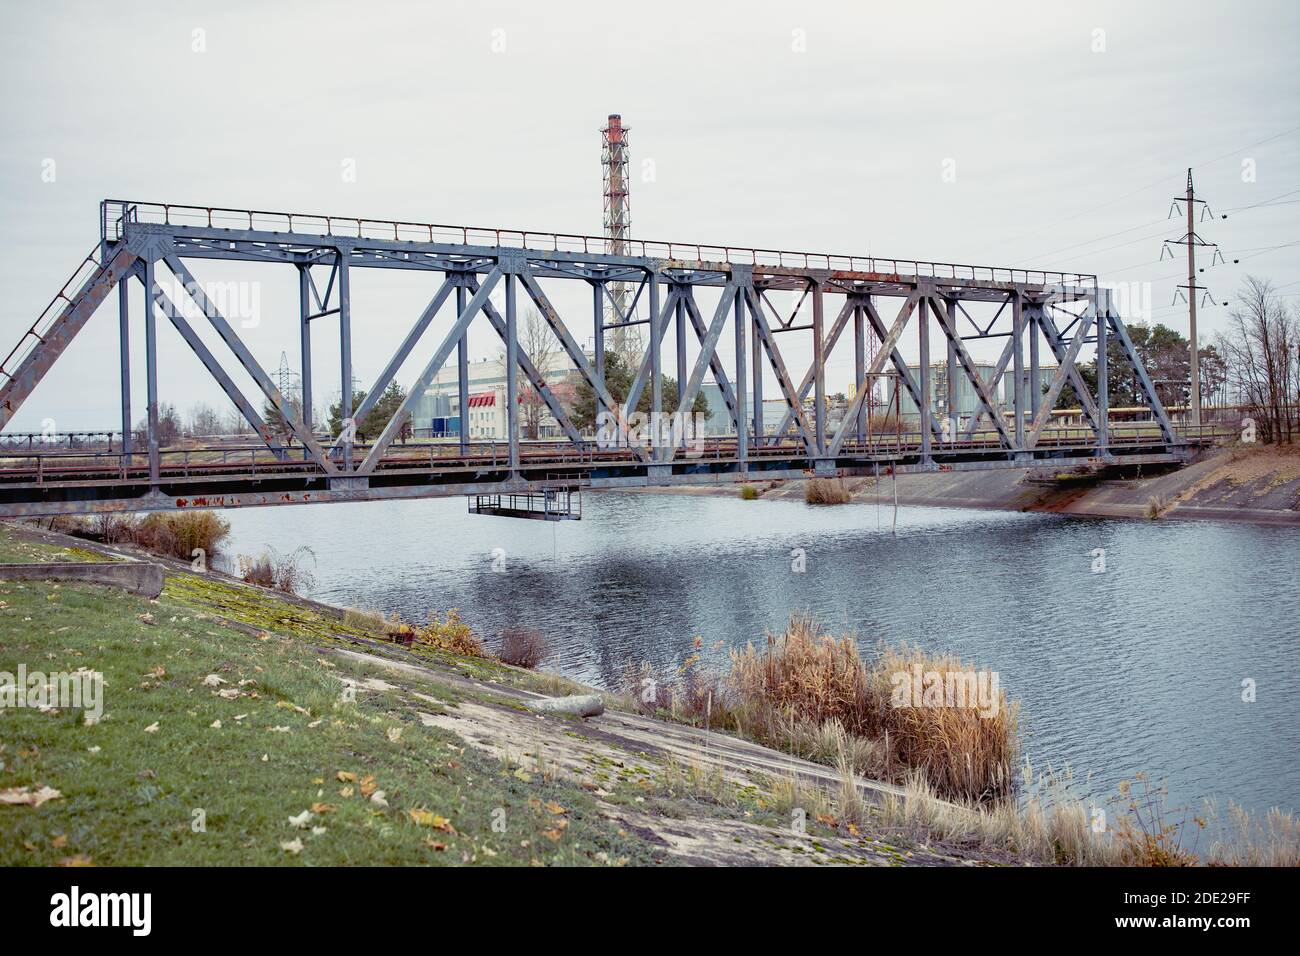 Railway bridge over the Pripyat river, Chernobyl. Metal structure, bridge supports. Bridge, years later, after the Chernobyl nuclear power plant. Ukra Stock Photo